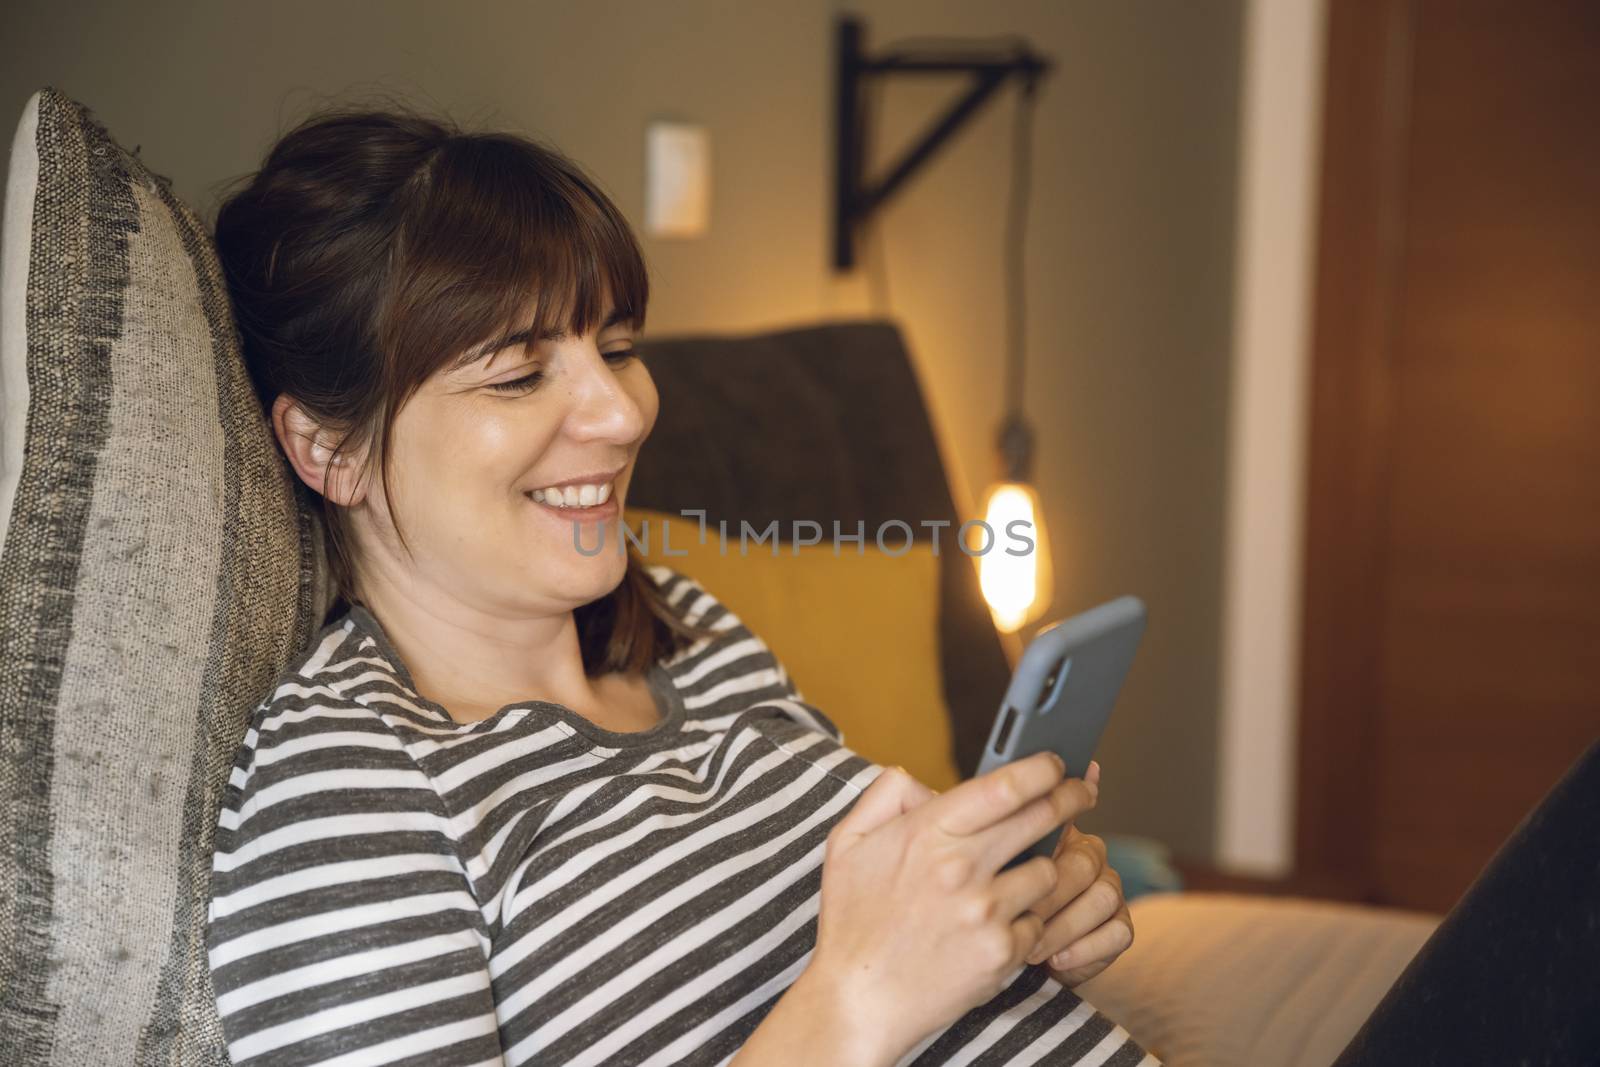 Woman on her bedroom, having a great chat at phone